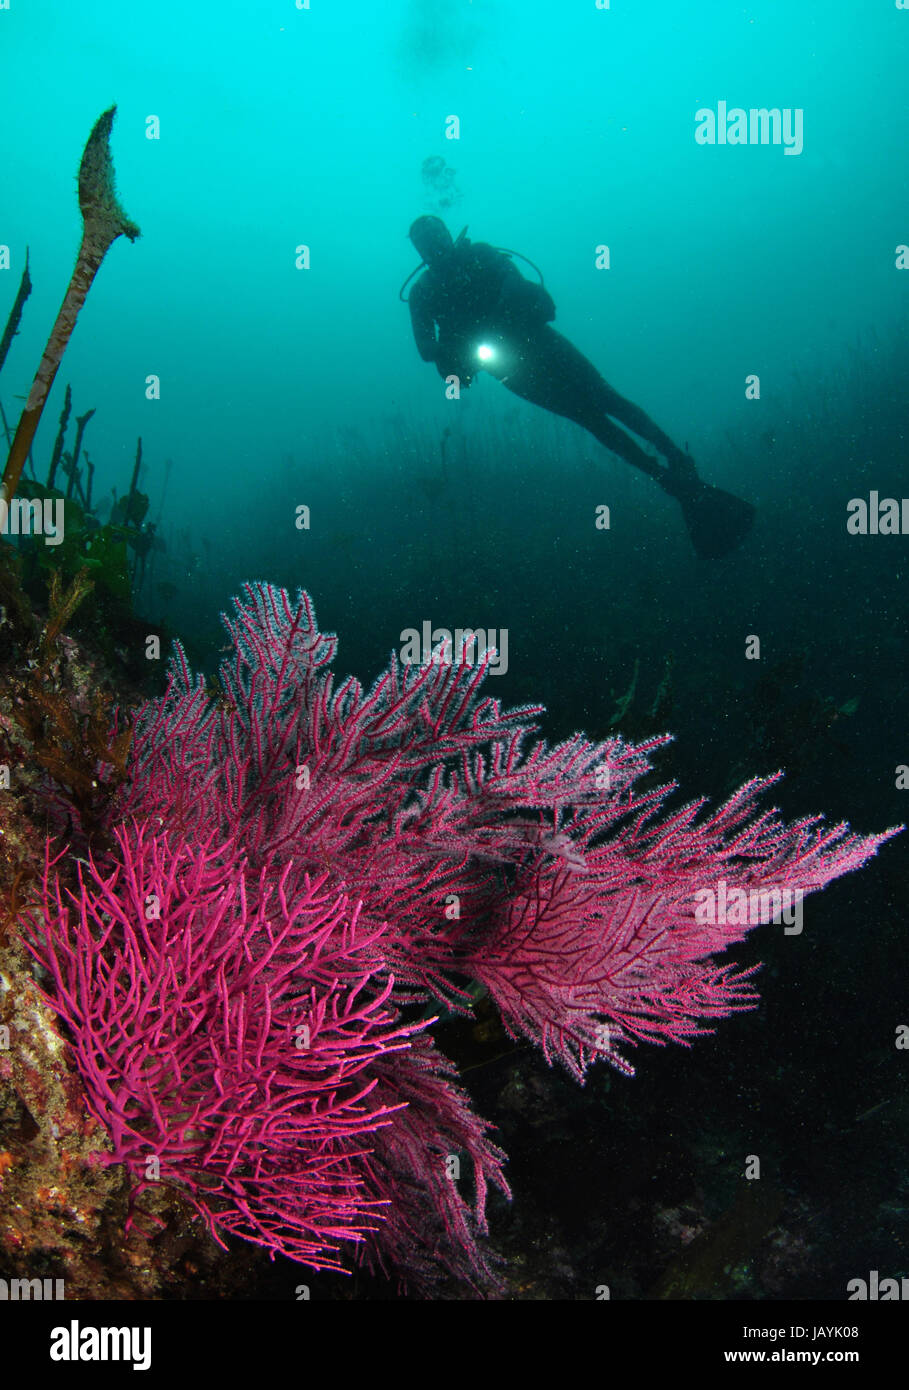 Divers and sea fans in the Atlantic Stock Photo